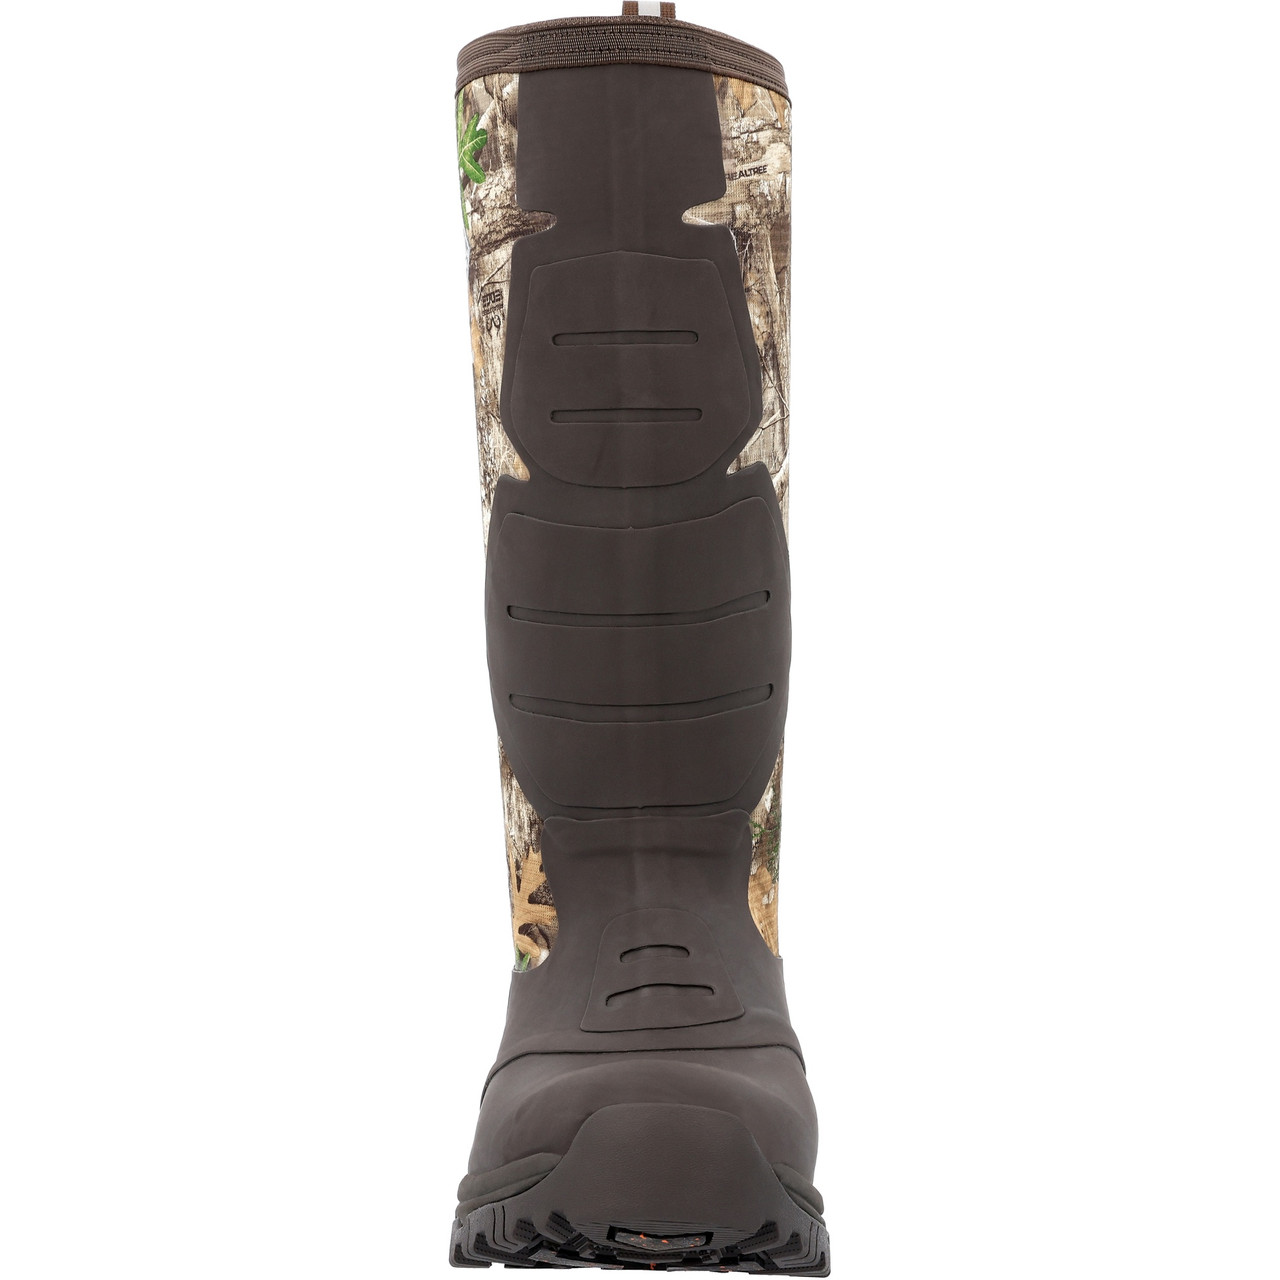 MUCK MEN'S REALTREE EDGE™ APEX PRO 16 IN INSULATED OUTDOOR BOOTS APMS-RTE